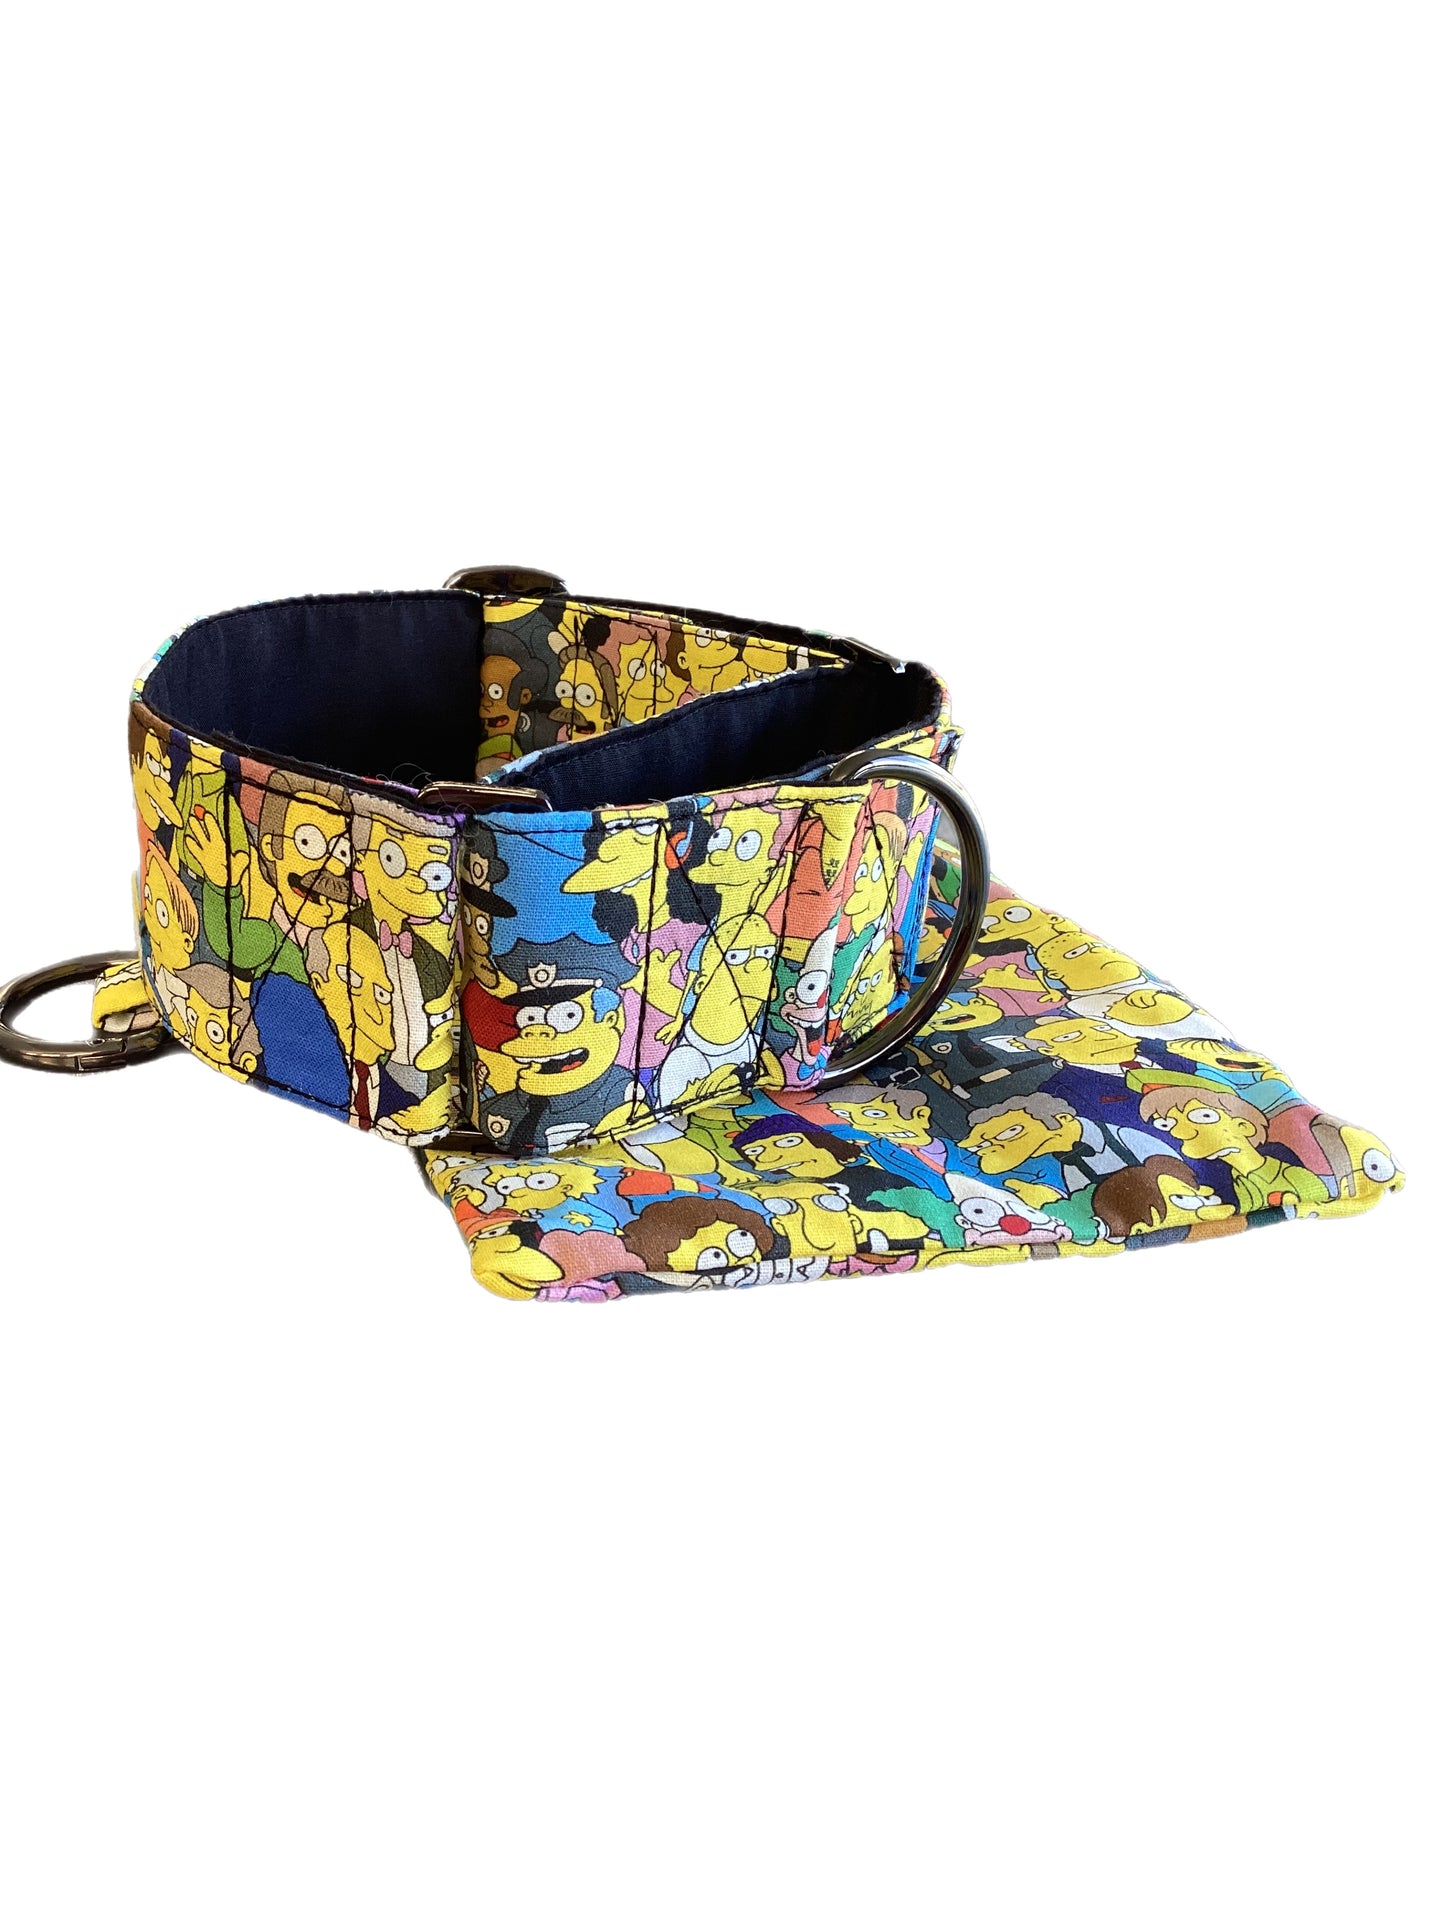 Martingale collar greyhound whippet  Simpsons family cotton fabric super soft